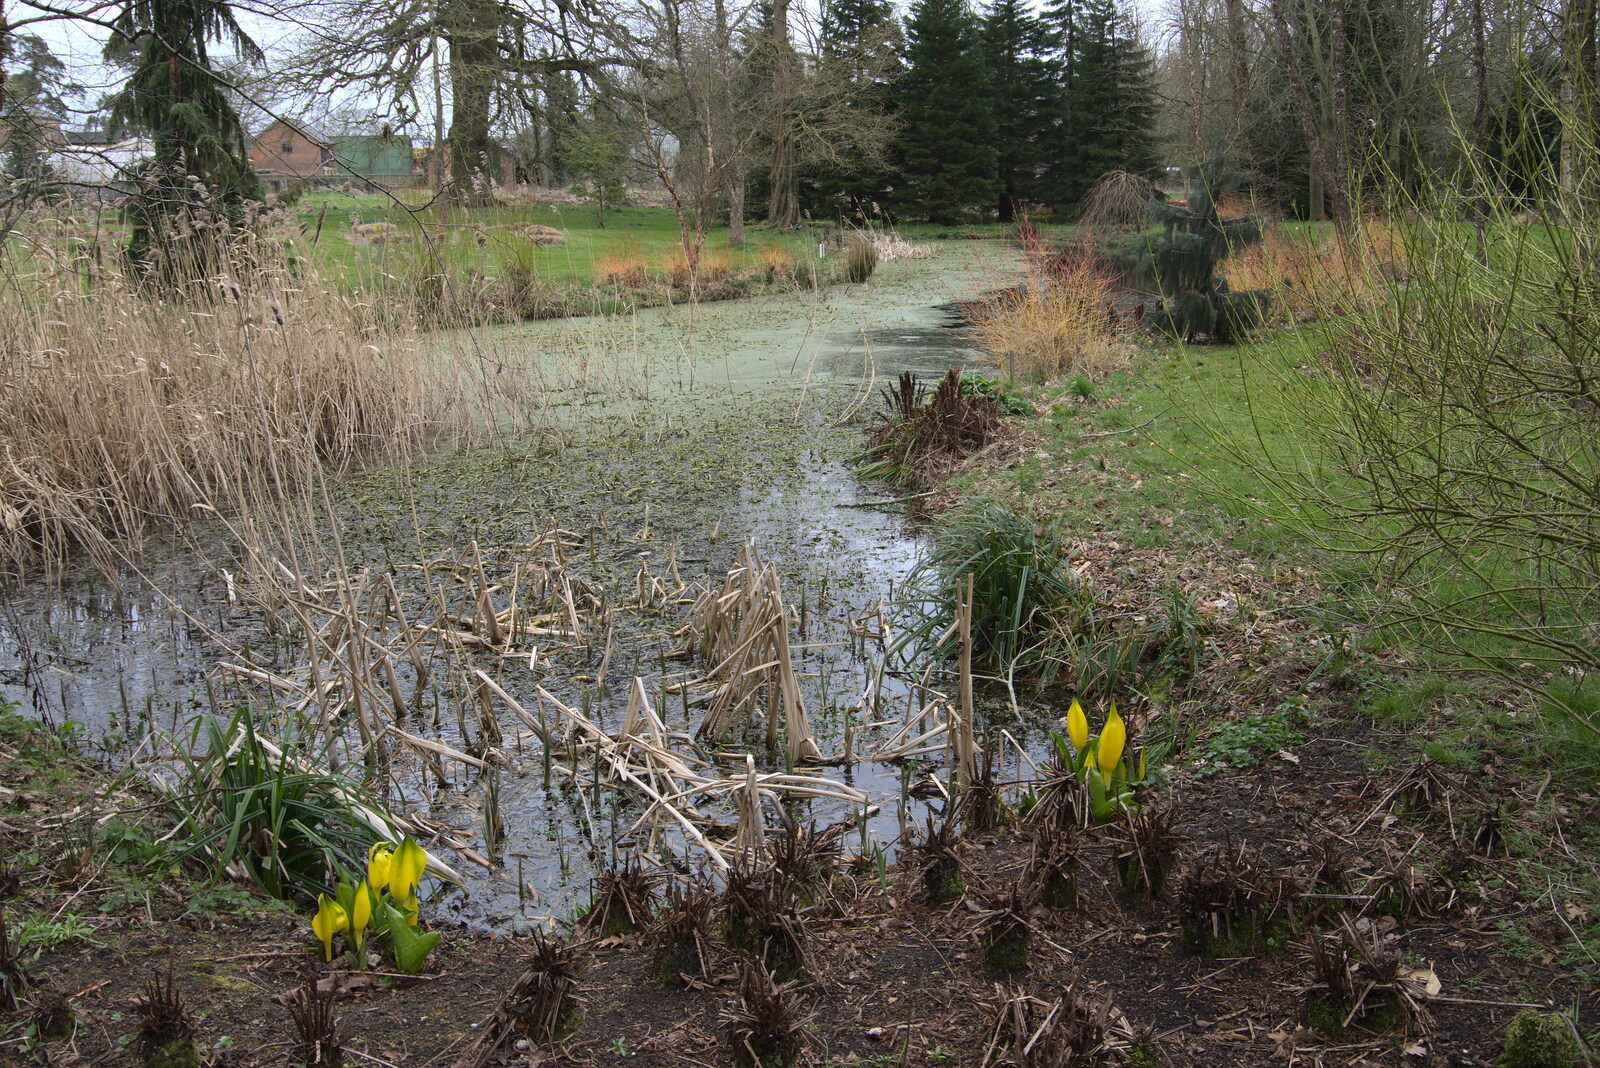 Another pond down in Foggy Bottom from A Return to Bressingham Steam and Gardens, Bressingham, Norfolk - 28th March 2021